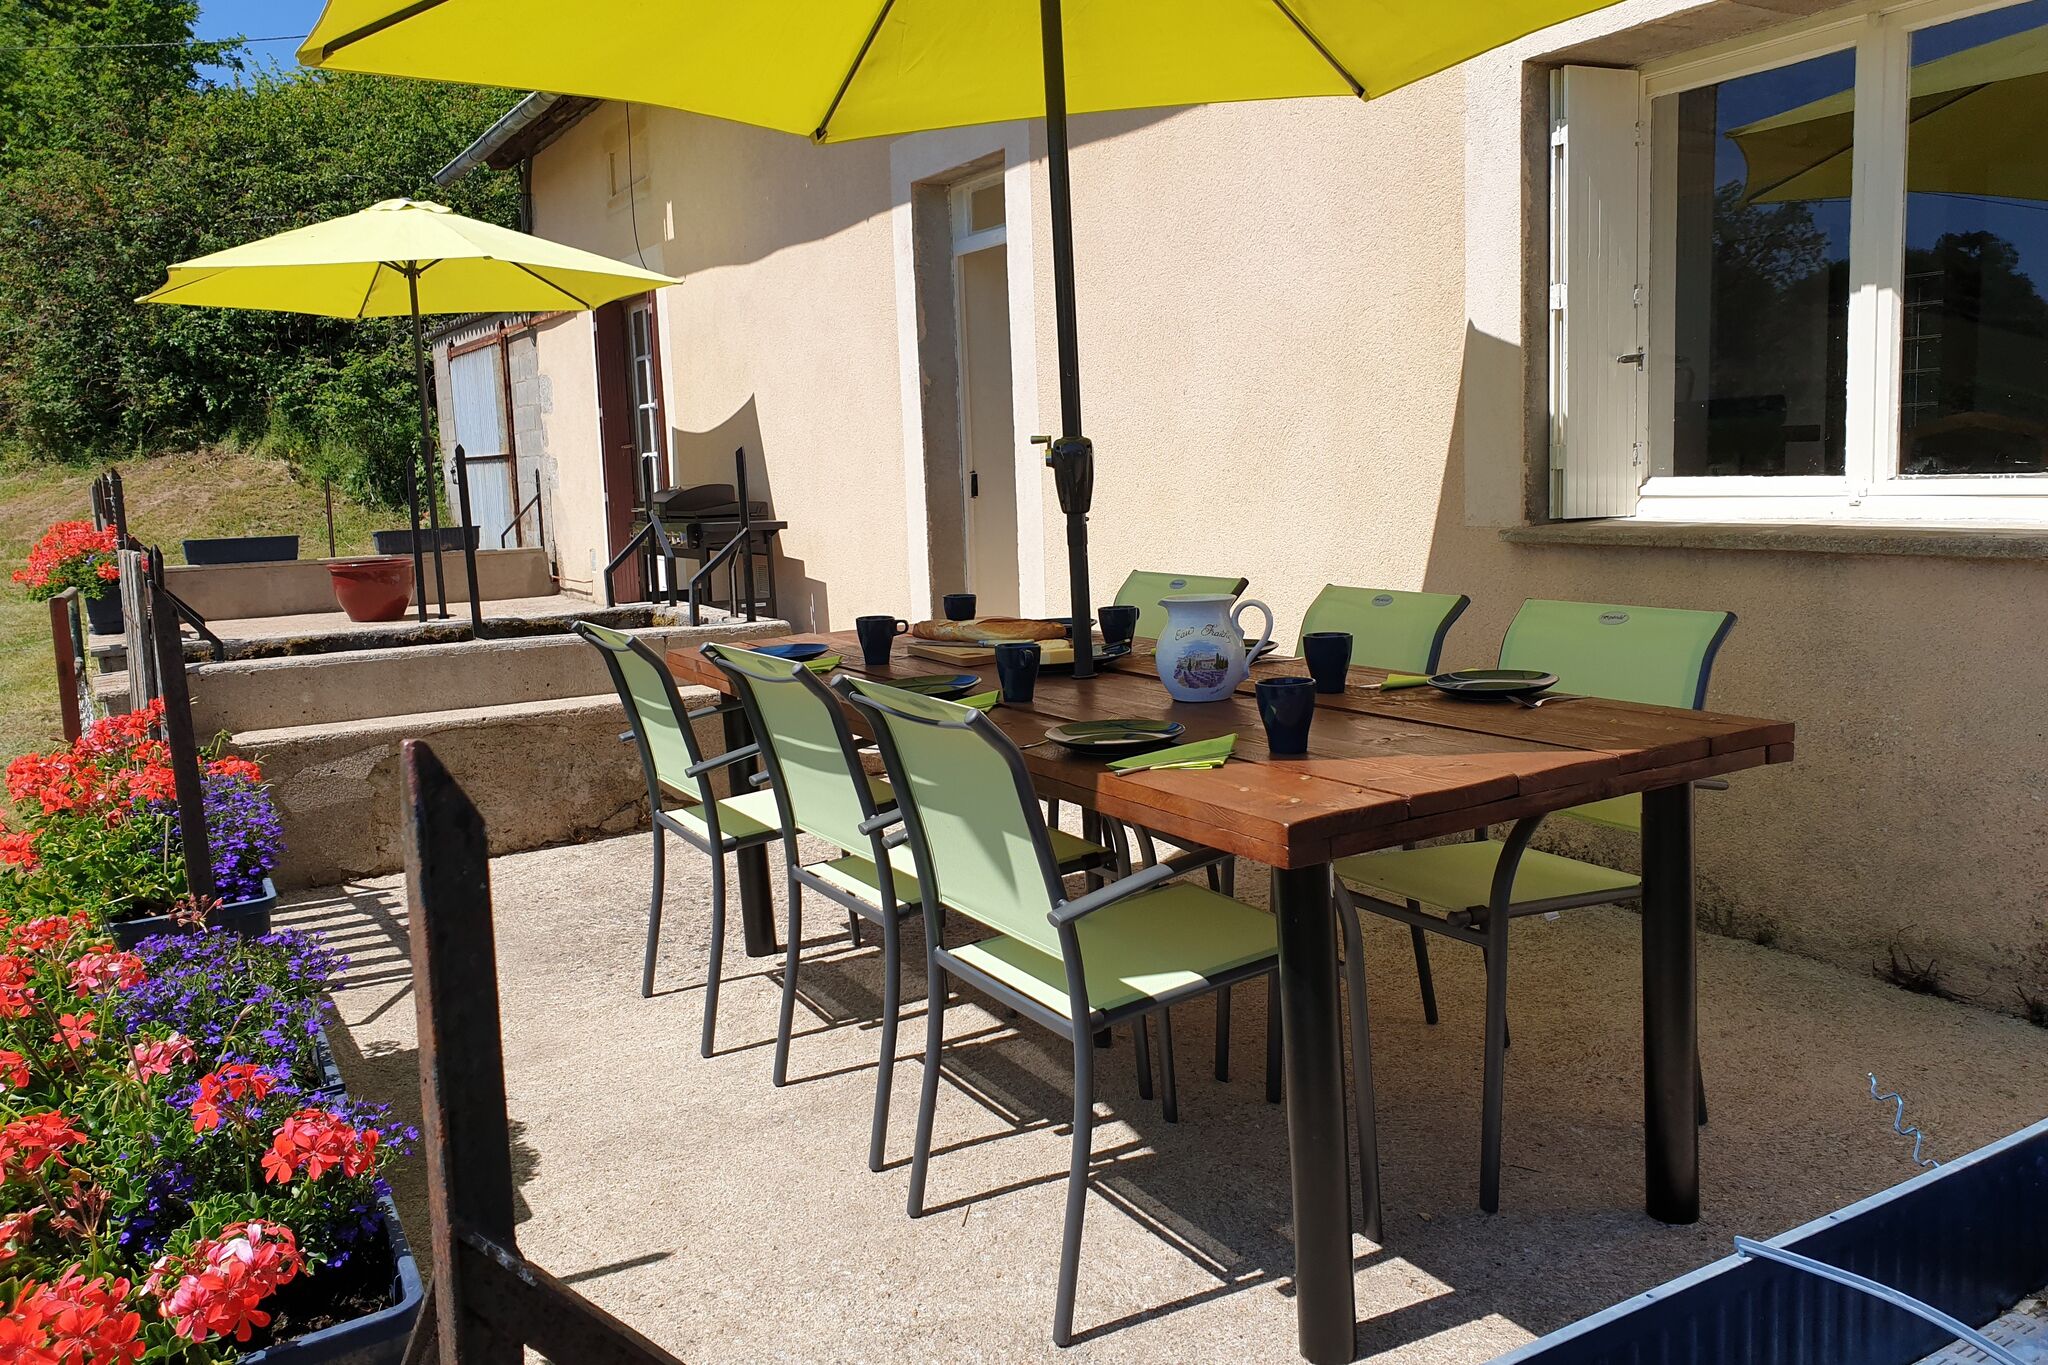 Enjoy the peace and nature in this gite with a pleasant garden and great views